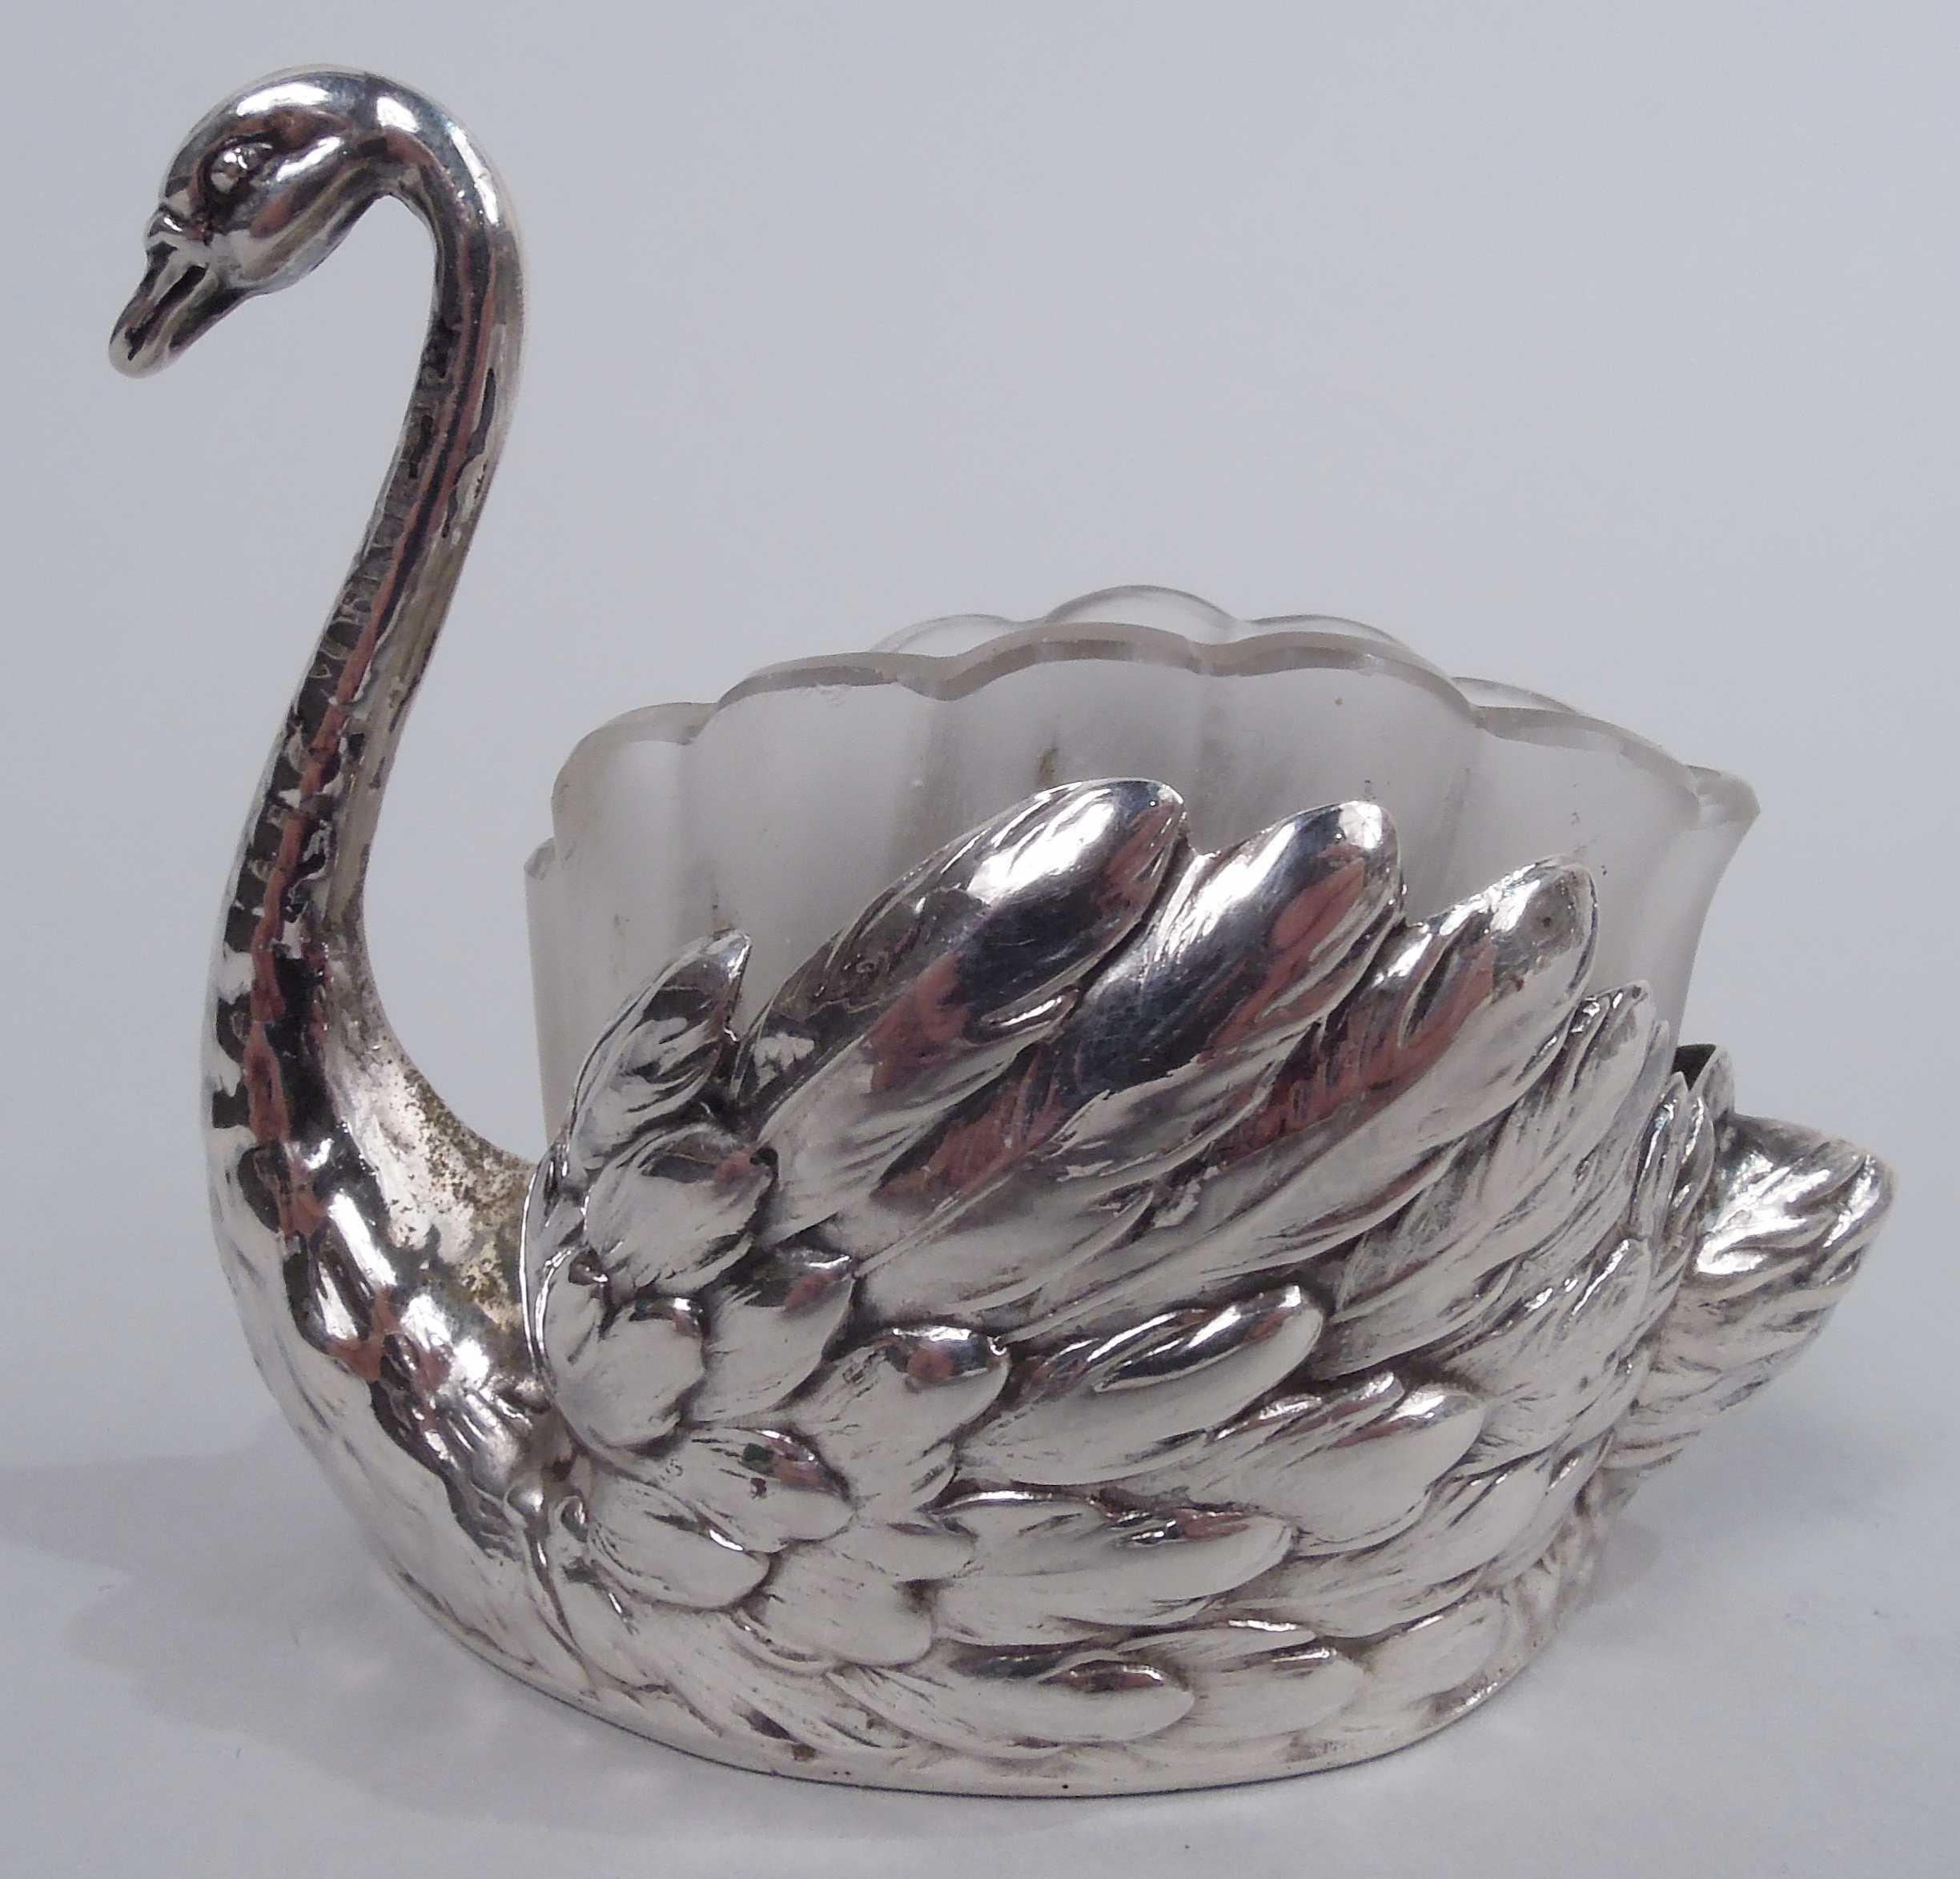 Set of 6 German 800 silver figural open salts, ca 1920. Each: A swan with erect neck and down-turned bill and pointy tail; body hollow. With fluted and scalloped frosted glass liner. Fully marked including maker’s stamp attributable to Martin Mayer.